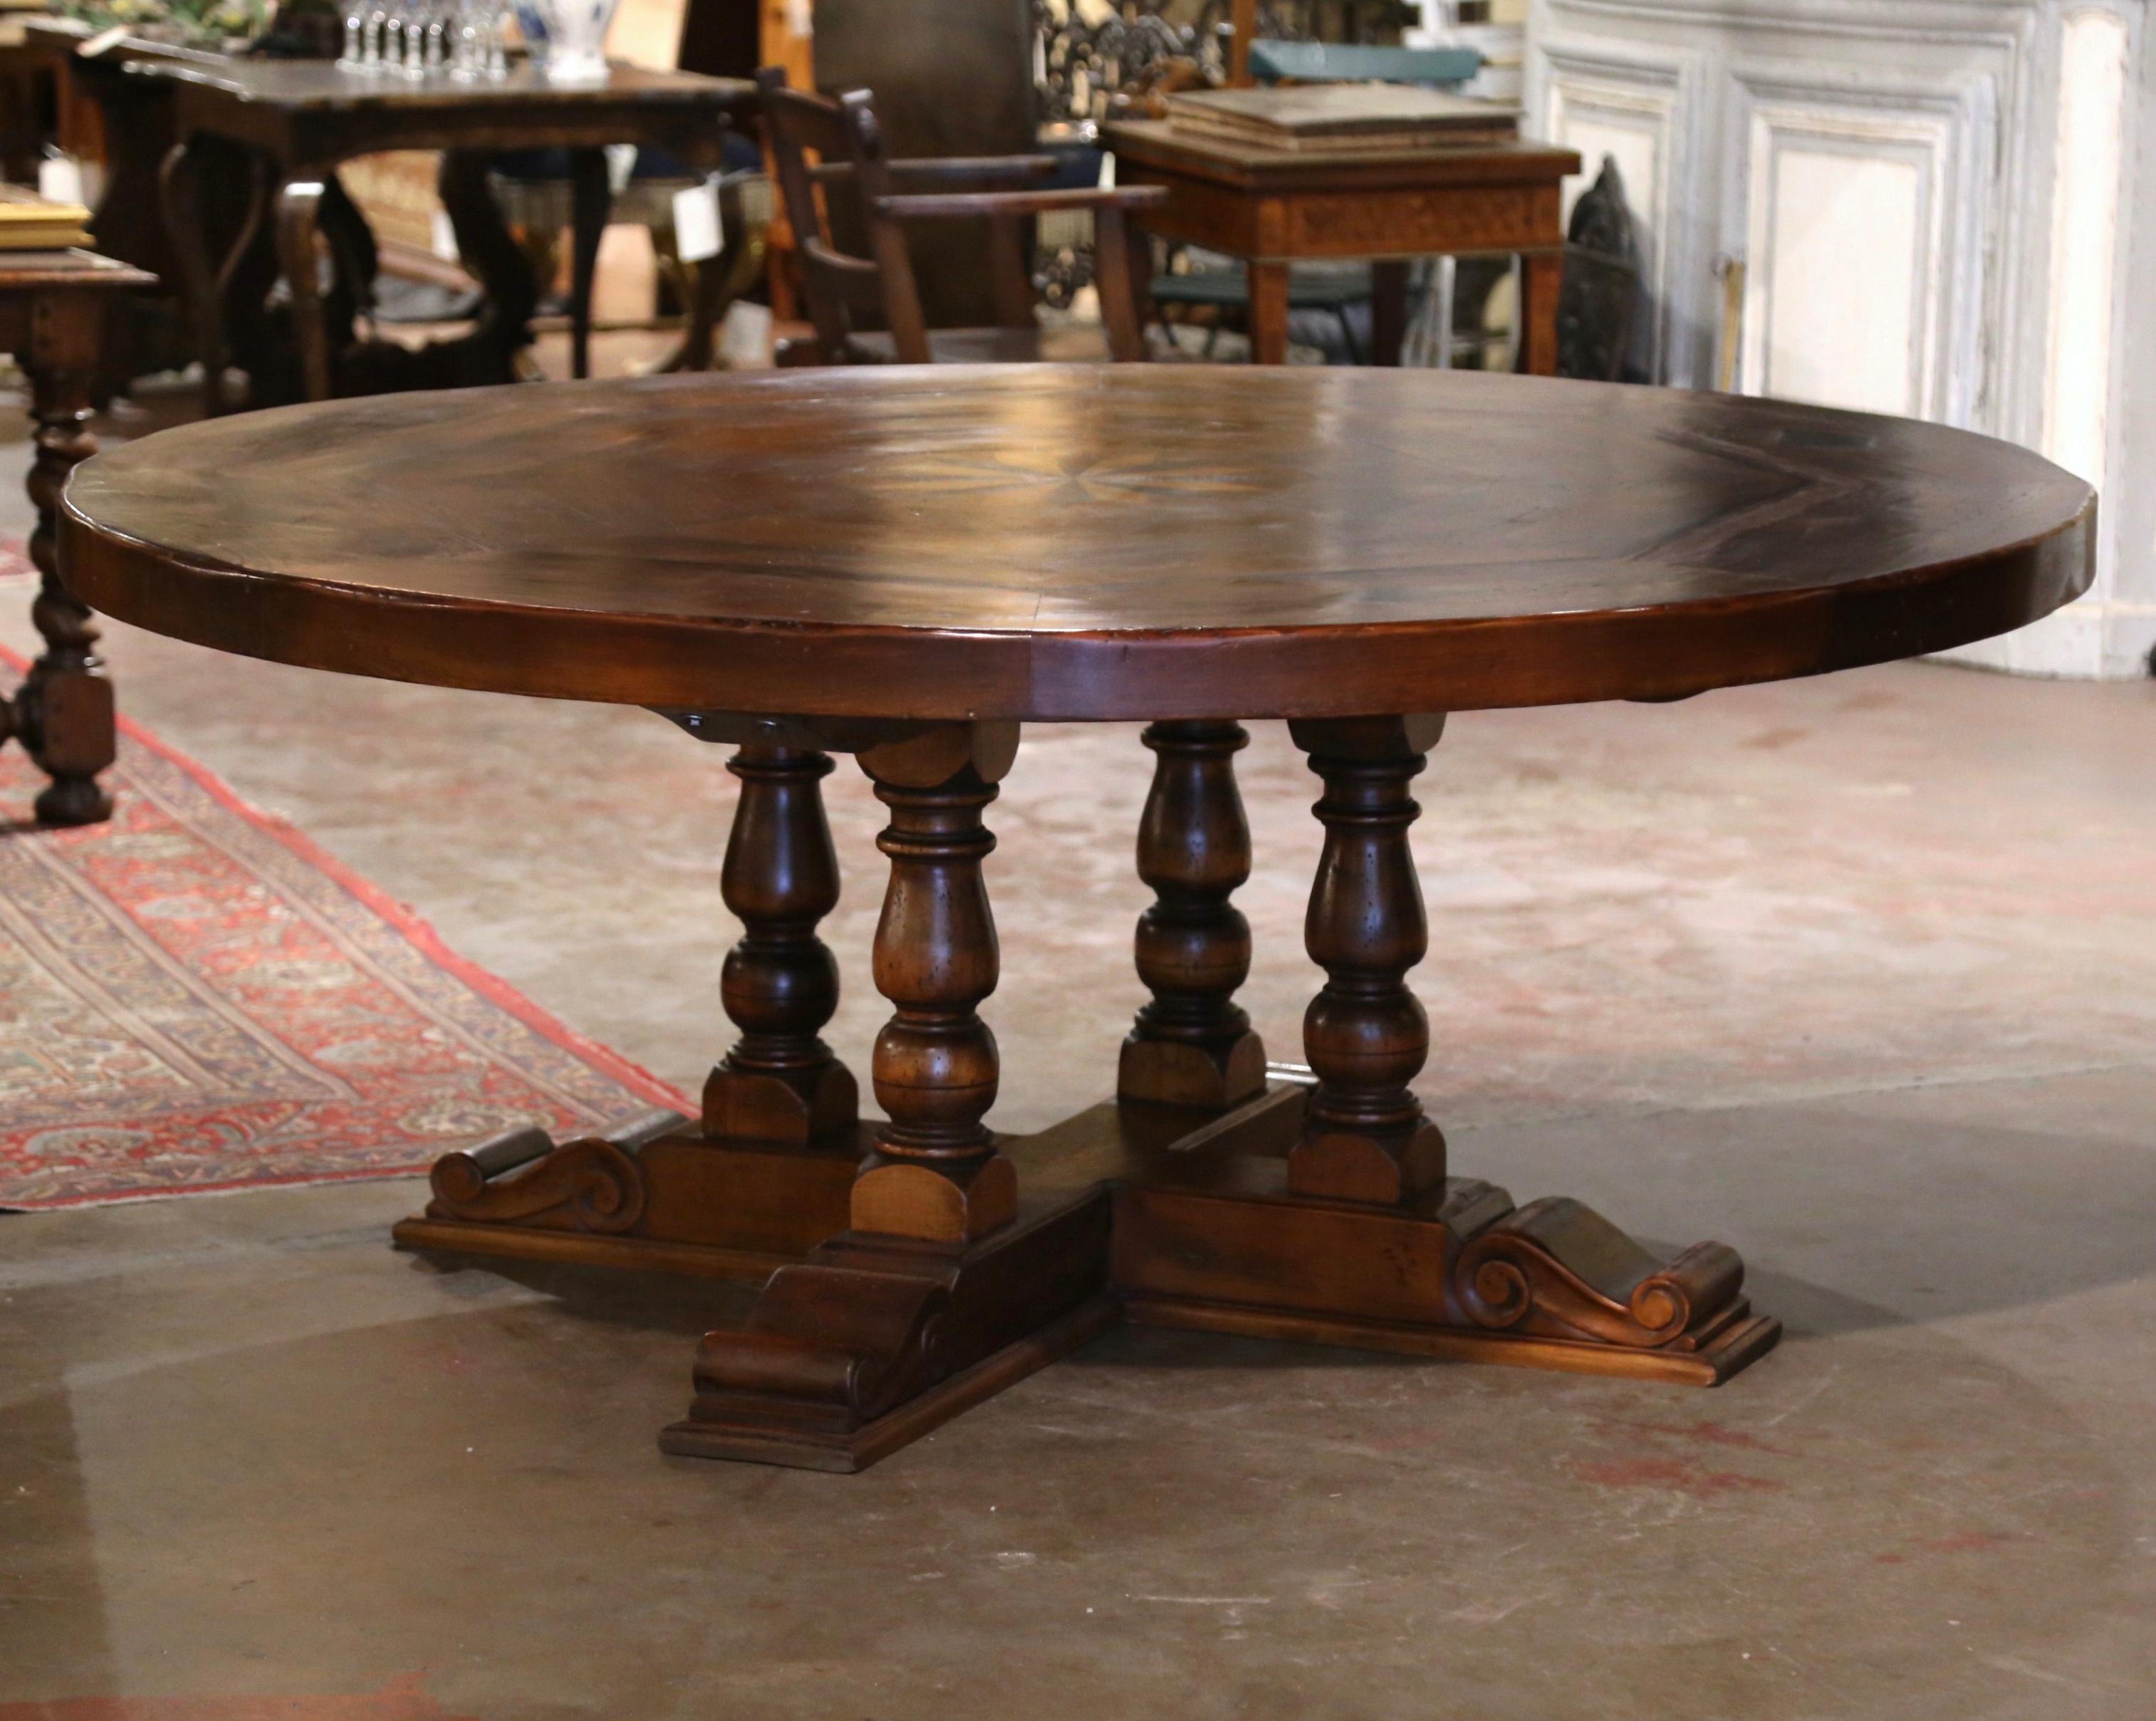 This elegant six foot round table stands on a sturdy pedestal base with four hand turned columns, and supported by hand carved molded flat shoe feet for ultimate stability. The intricate 3